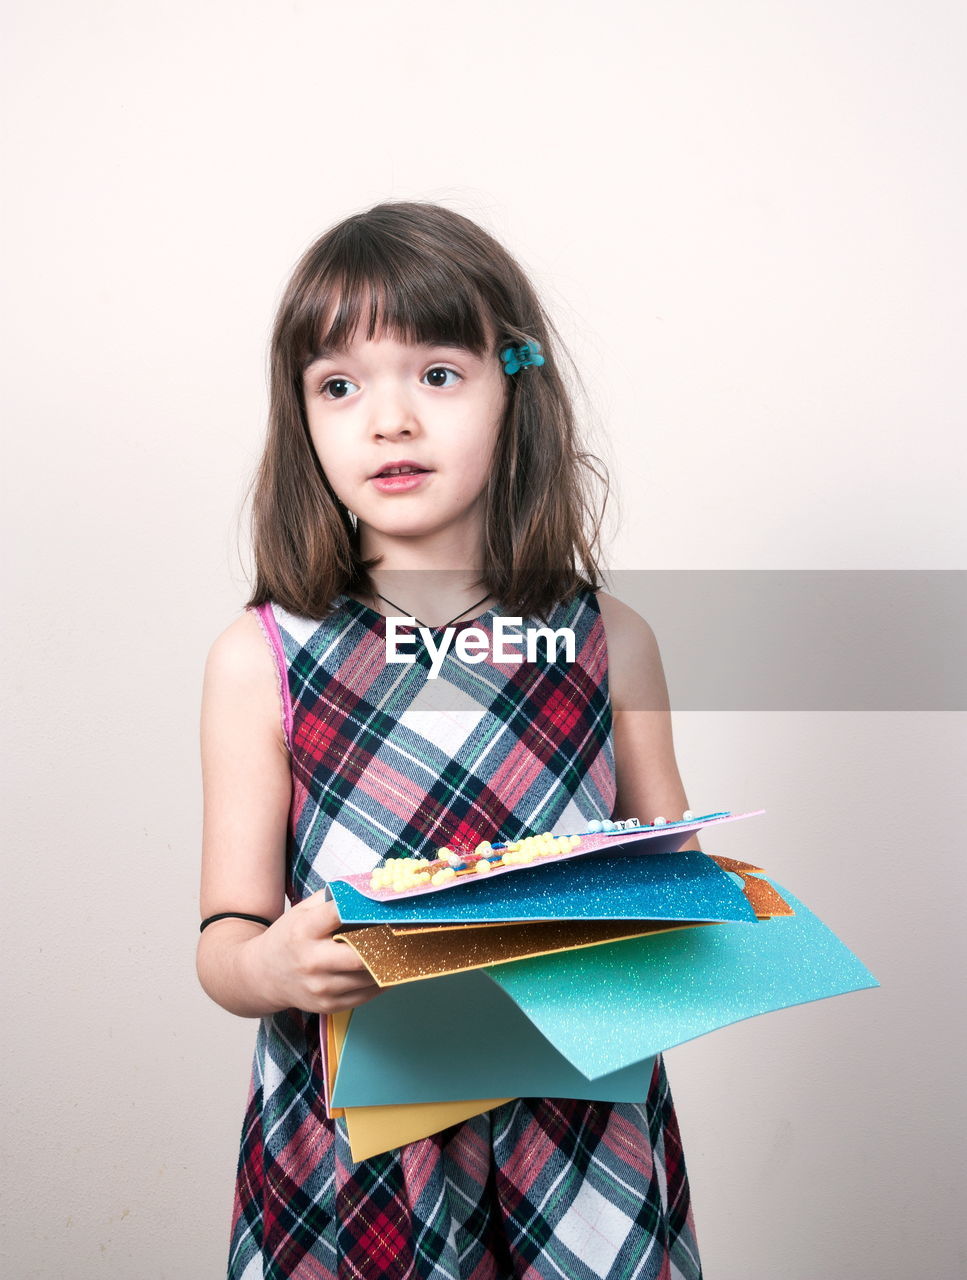 child, childhood, one person, portrait, education, studio shot, learning, women, indoors, cute, student, looking at camera, publication, female, pattern, white background, hairstyle, book, front view, brown hair, photo shoot, innocence, casual clothing, holding, emotion, clothing, waist up, long hair, copy space, smiling, standing, tartan, studying, school children, looking, happiness, sitting, fun, school, person